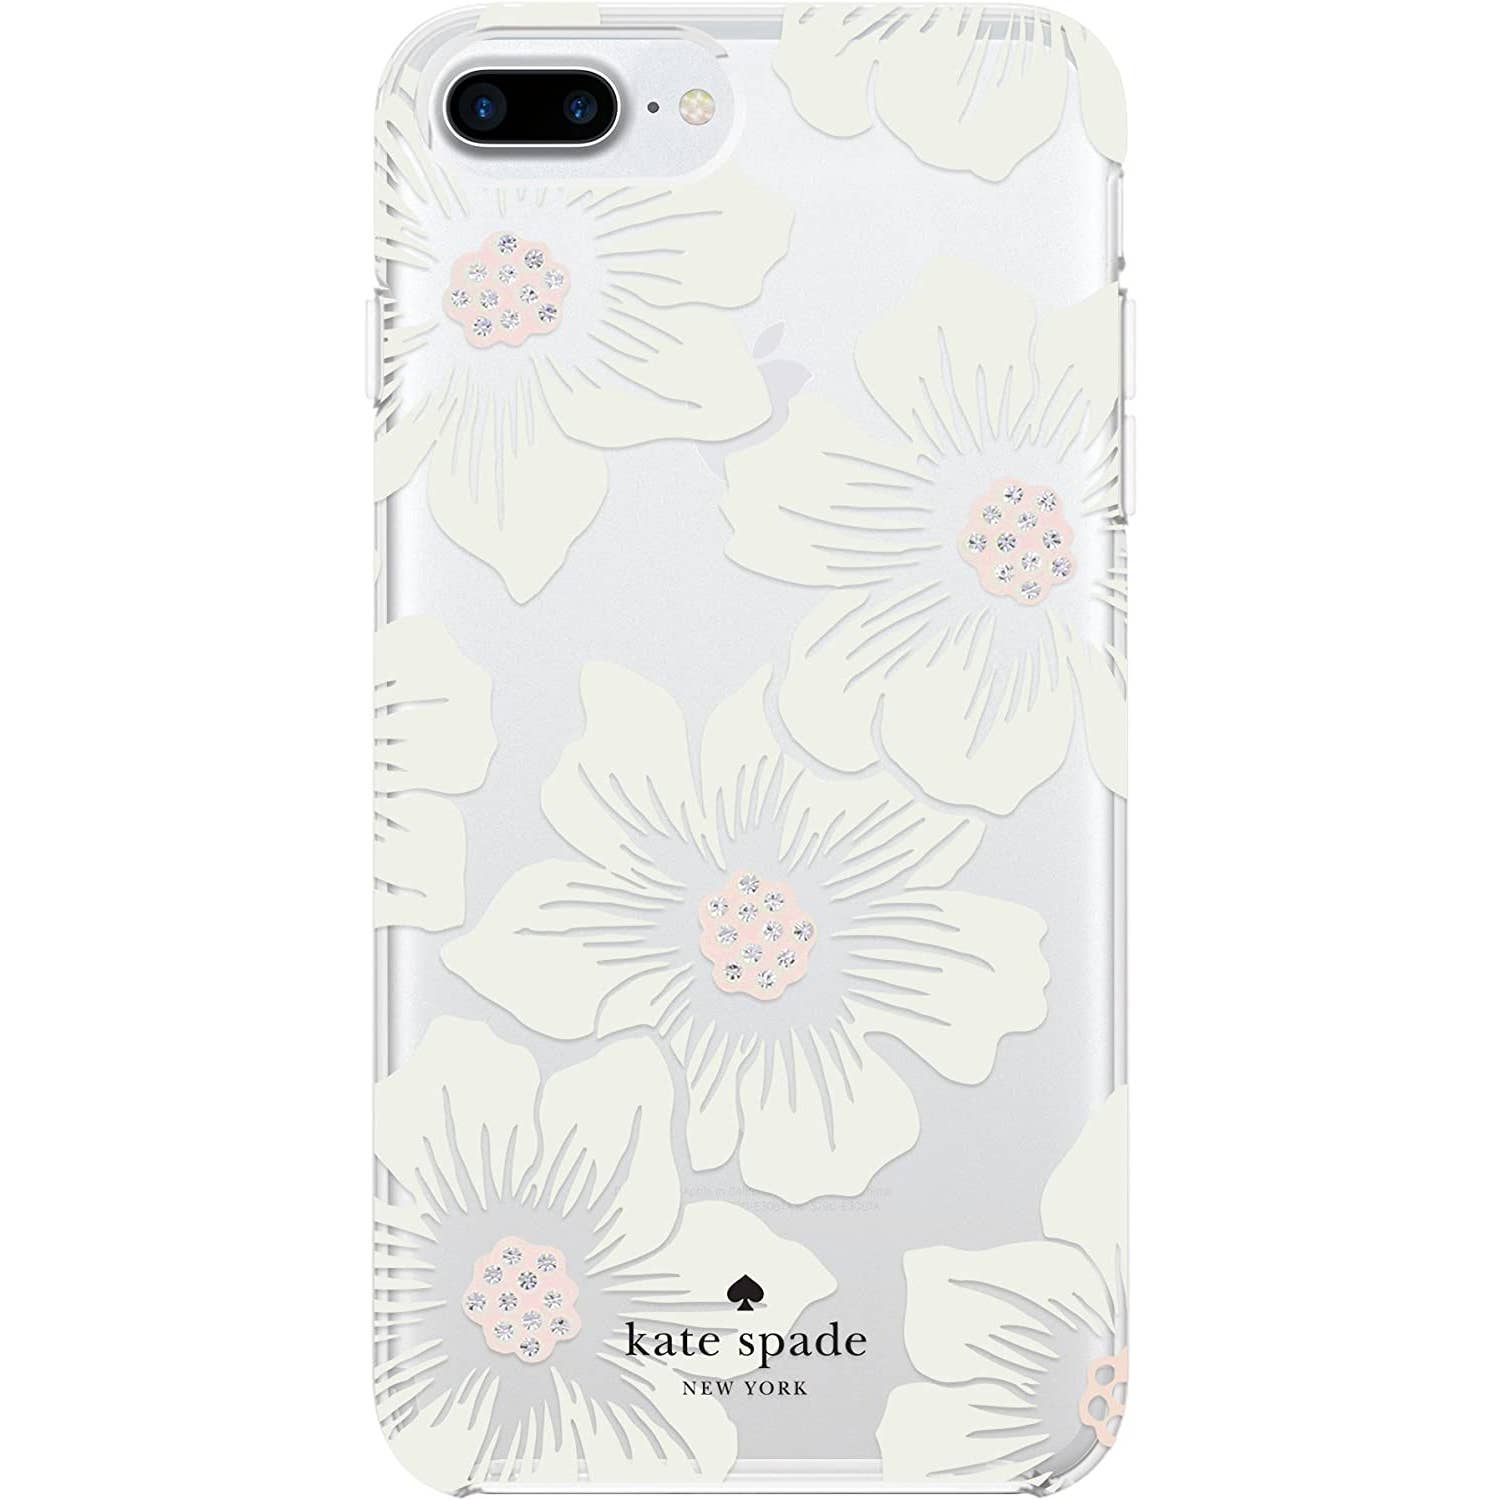 kate spade new york - KSIPH-056-HHCCS Protective Hardshell Case for Apple® iPhone® 8 Plus - Cream with Stones/Hollyhock Floral Clear